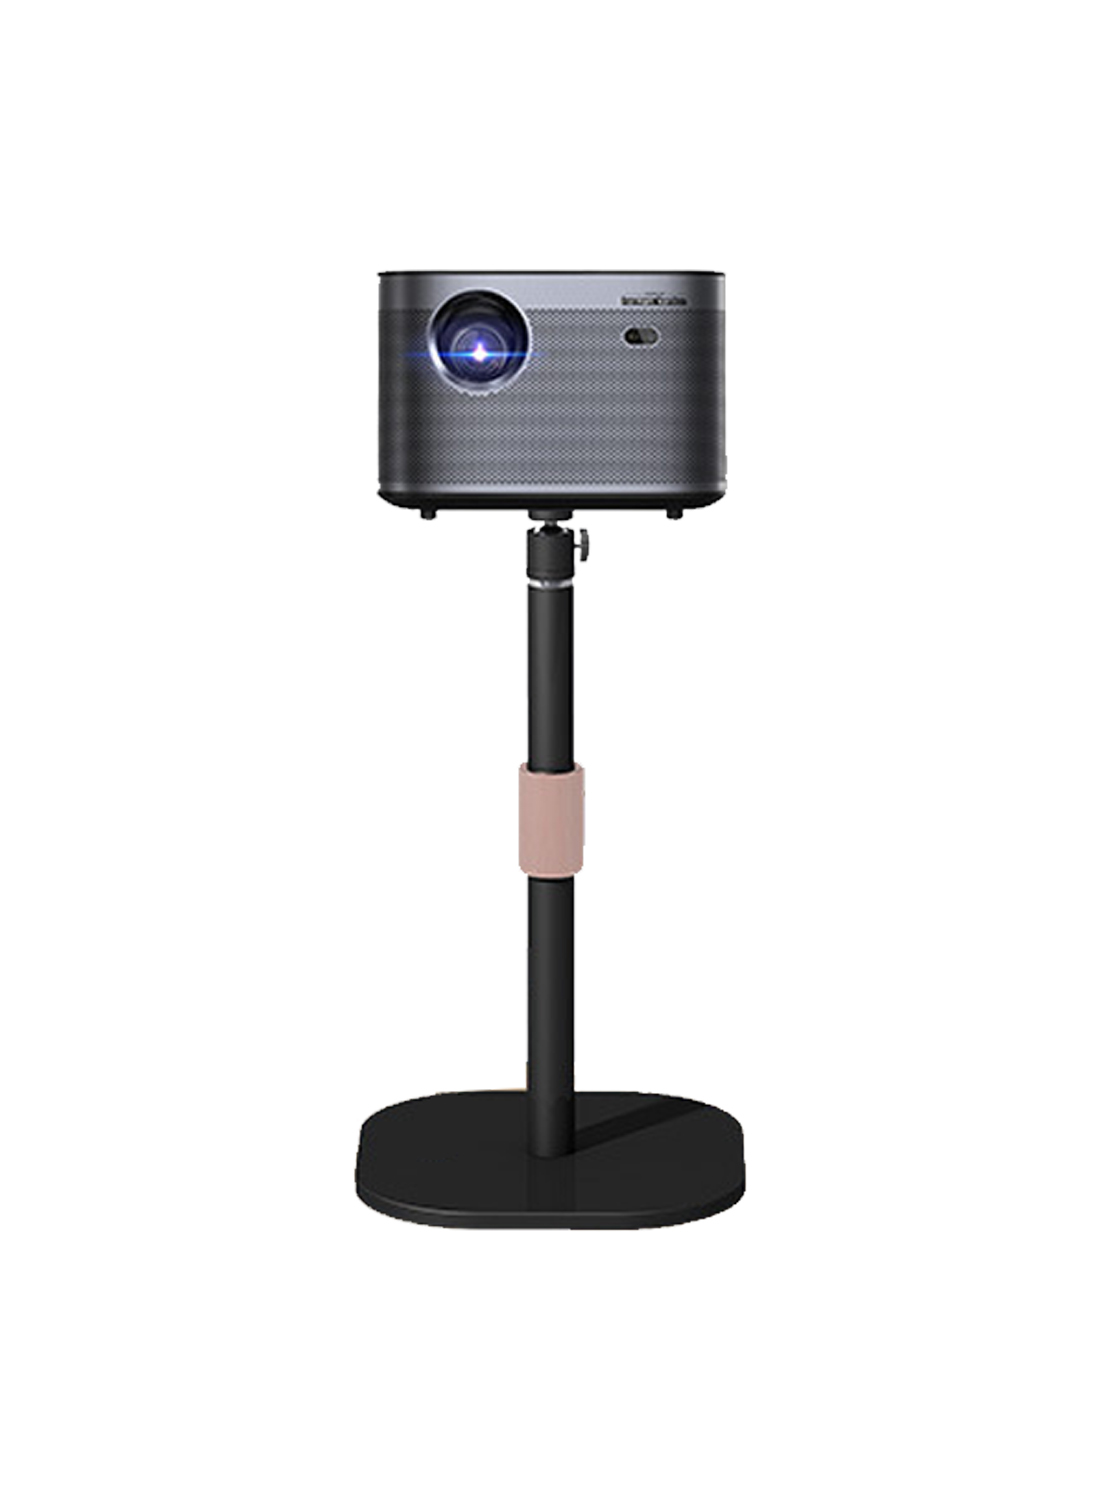 Desktop Alloy Projector Stand with 360 Degree Adjustment Metal Gimbal Suitable for Most Projectors for Business Conference